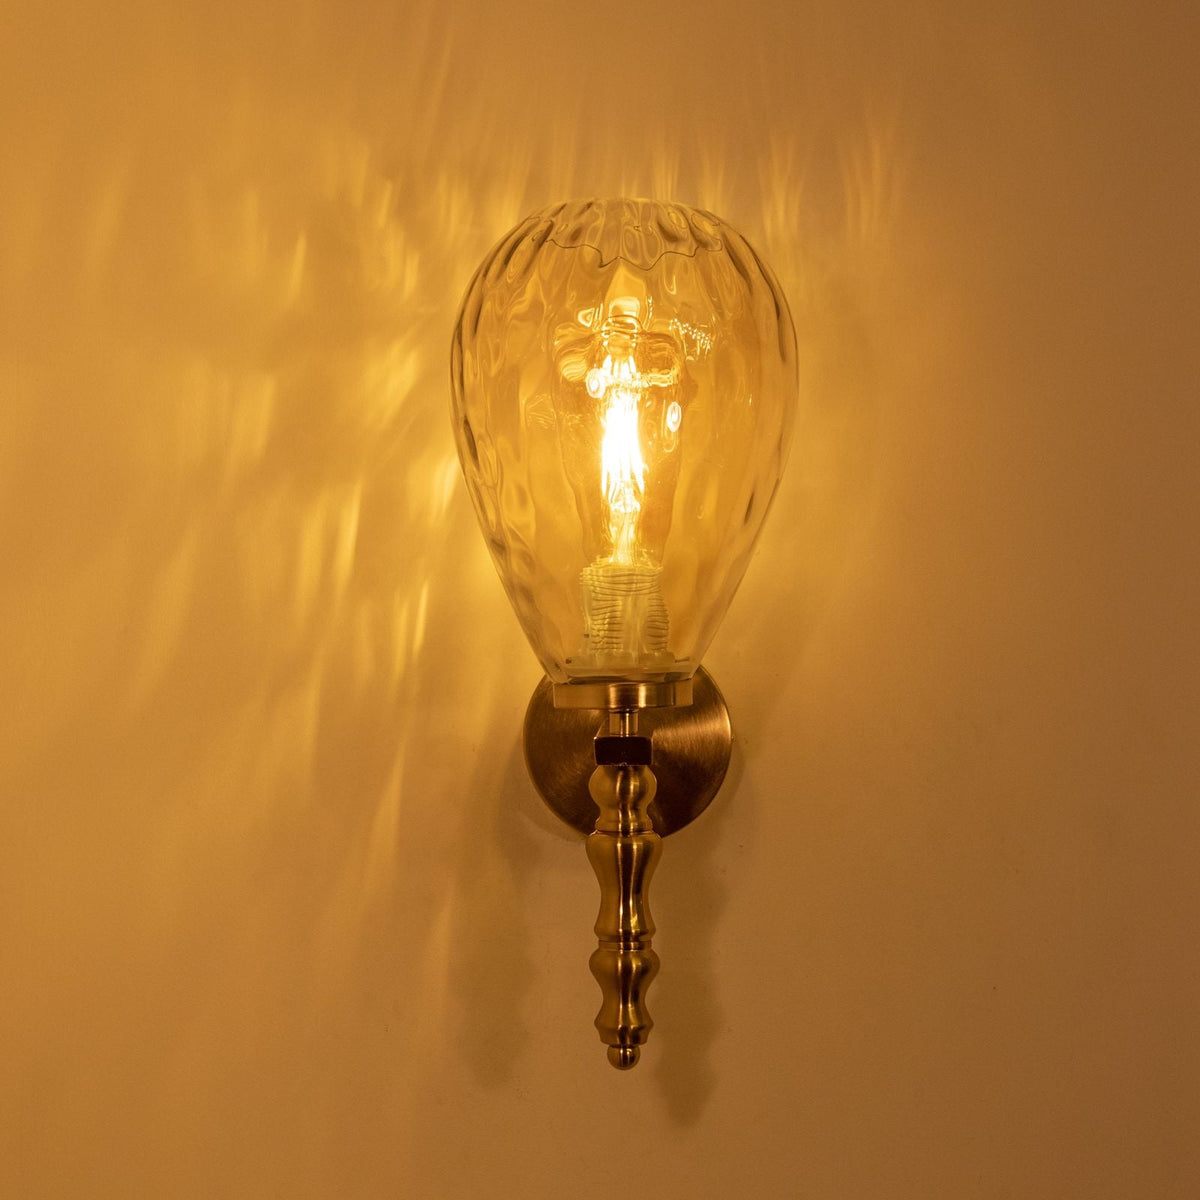 Finding Glory Wall Lamp online